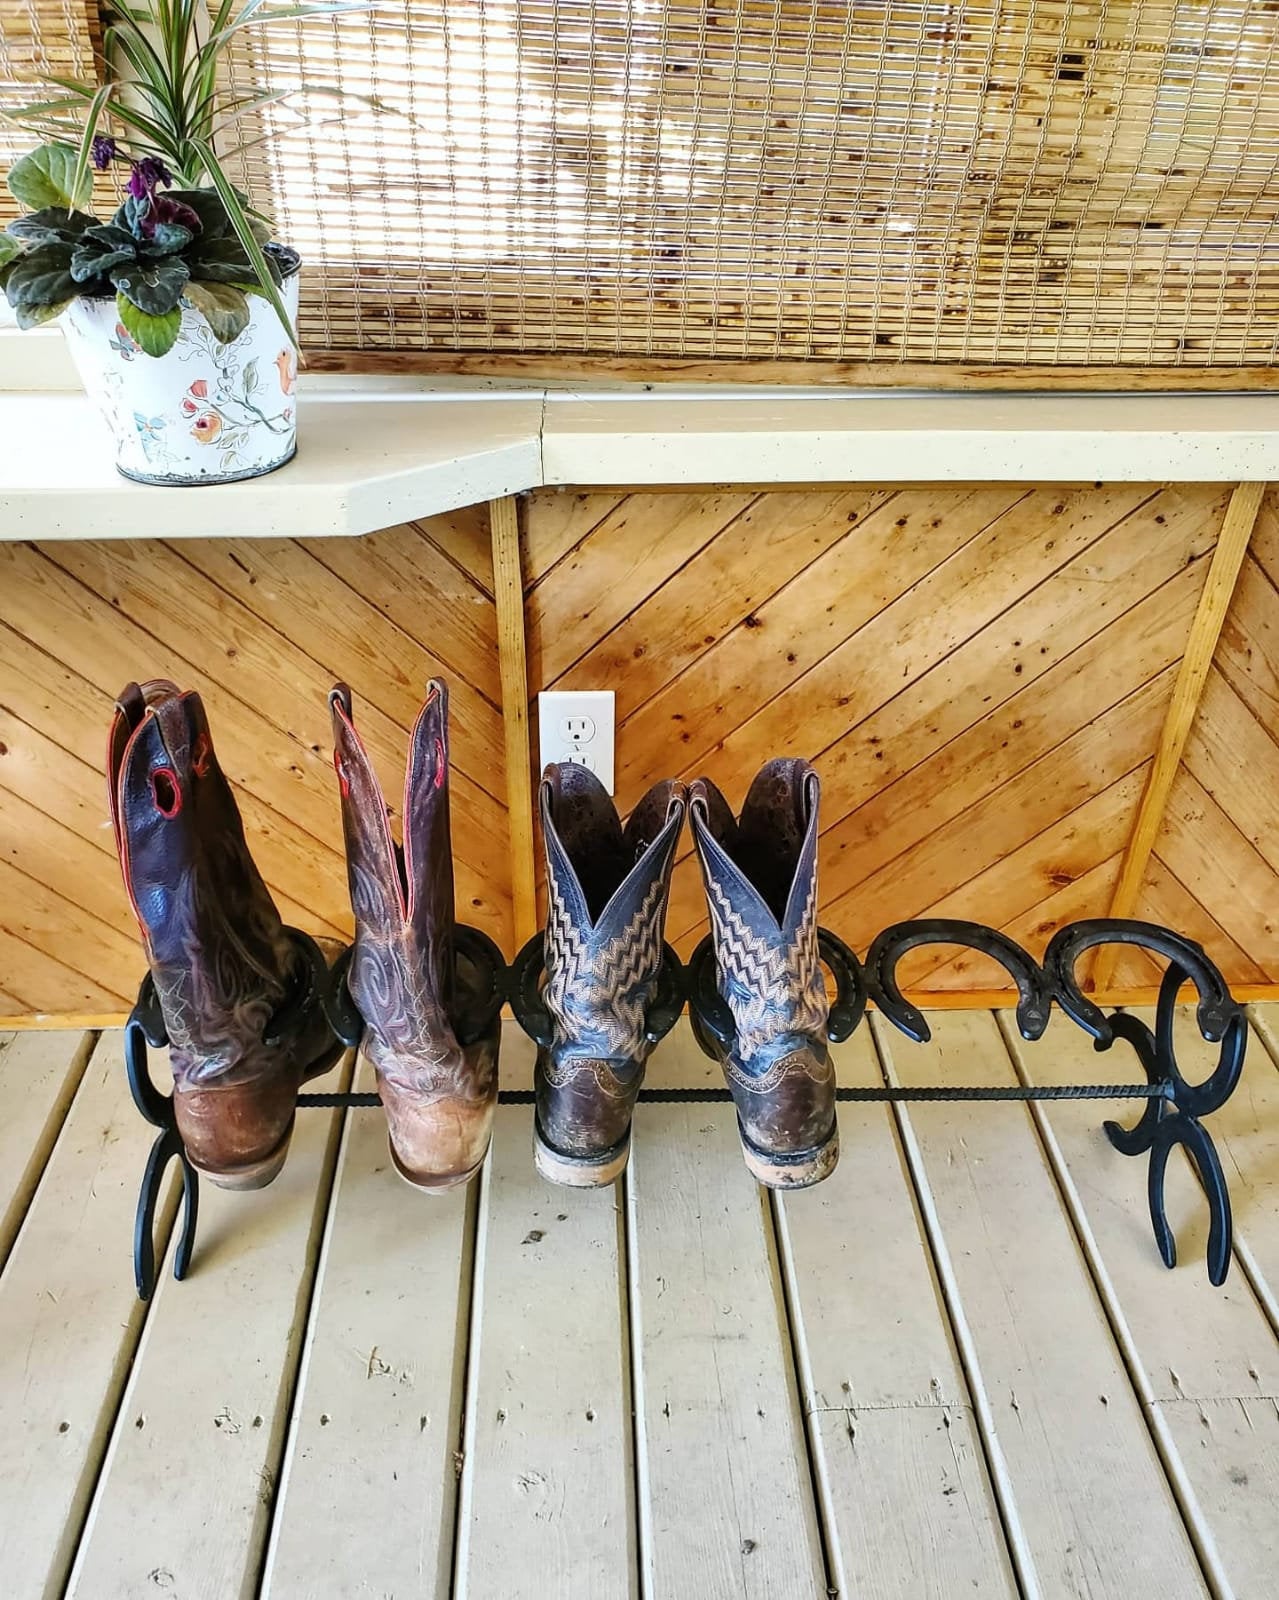 Horseshoe Boot Rack. Three Pair Boot Rack. FREE FED EX Home Delivery 